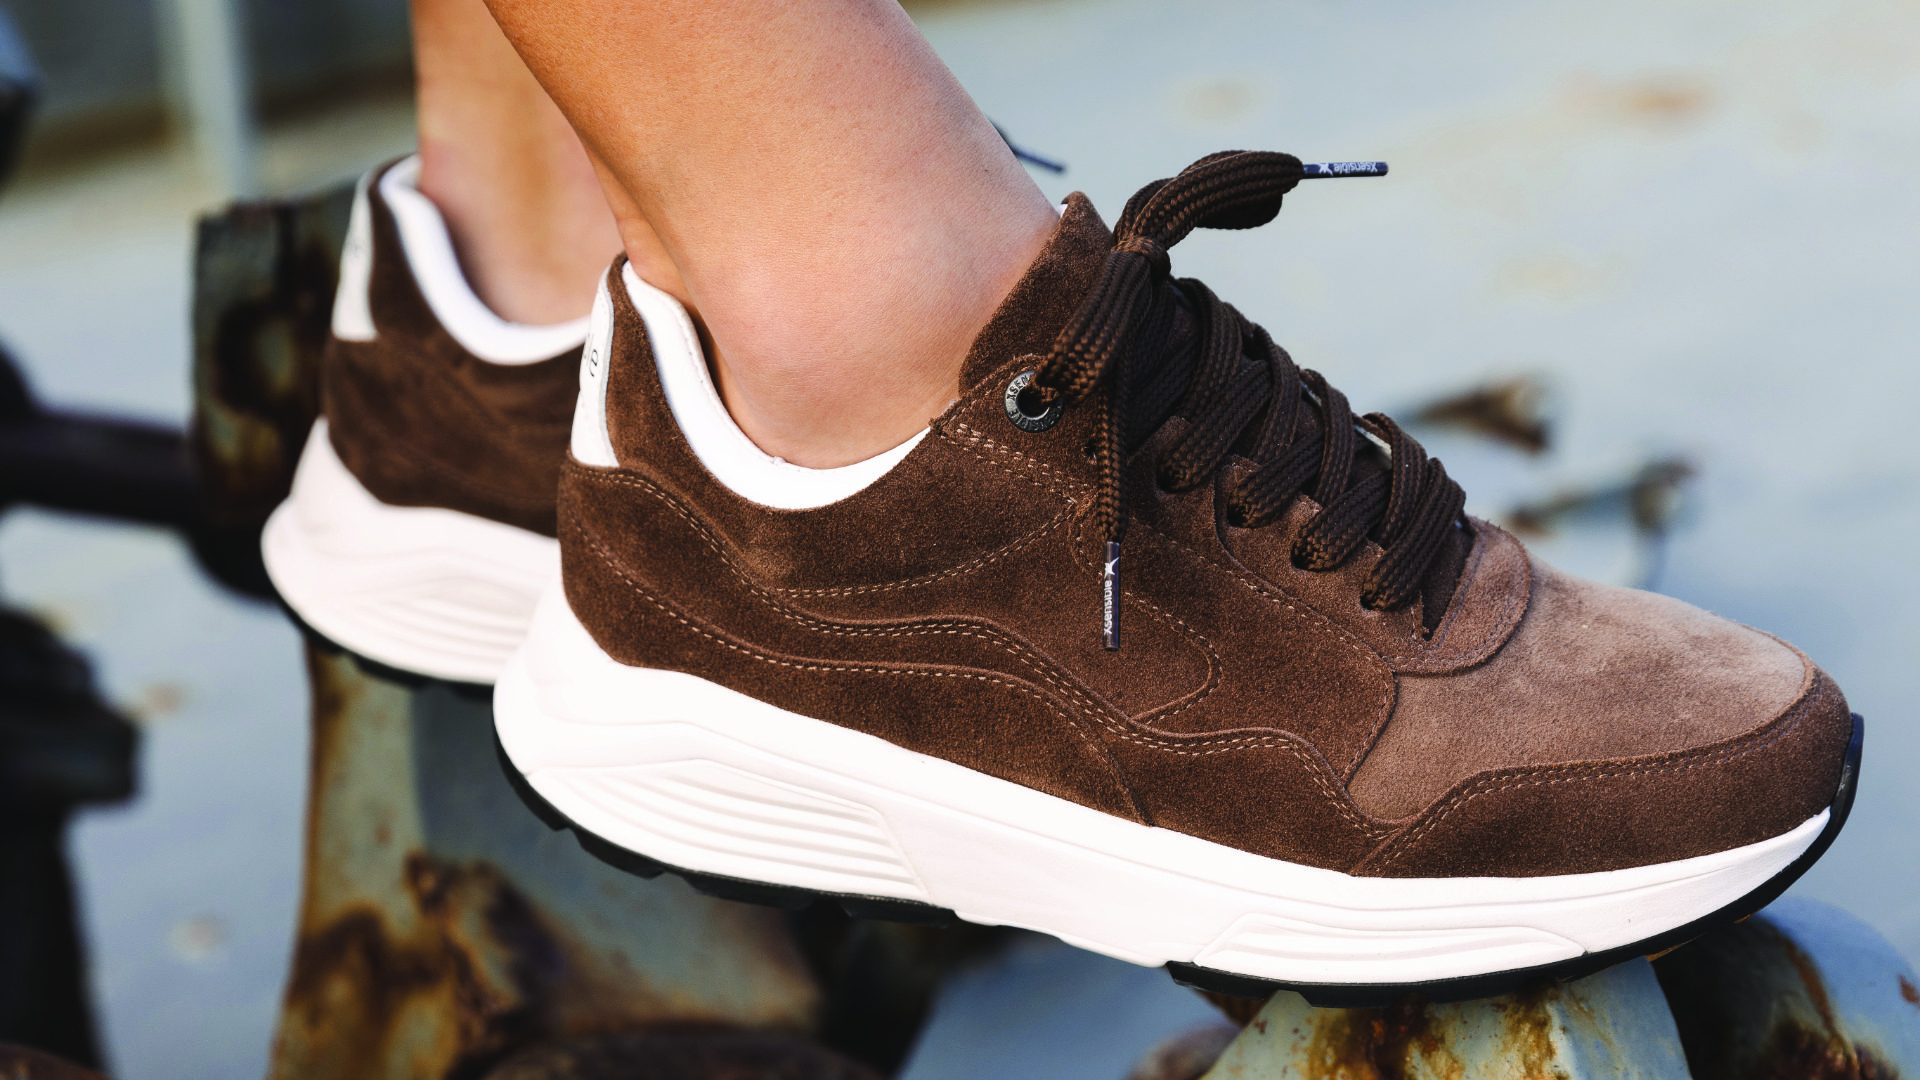 A pair of Brown Xsensble Stretchwalker Golden Gate shoes, great for managing diabetes symtpoms.